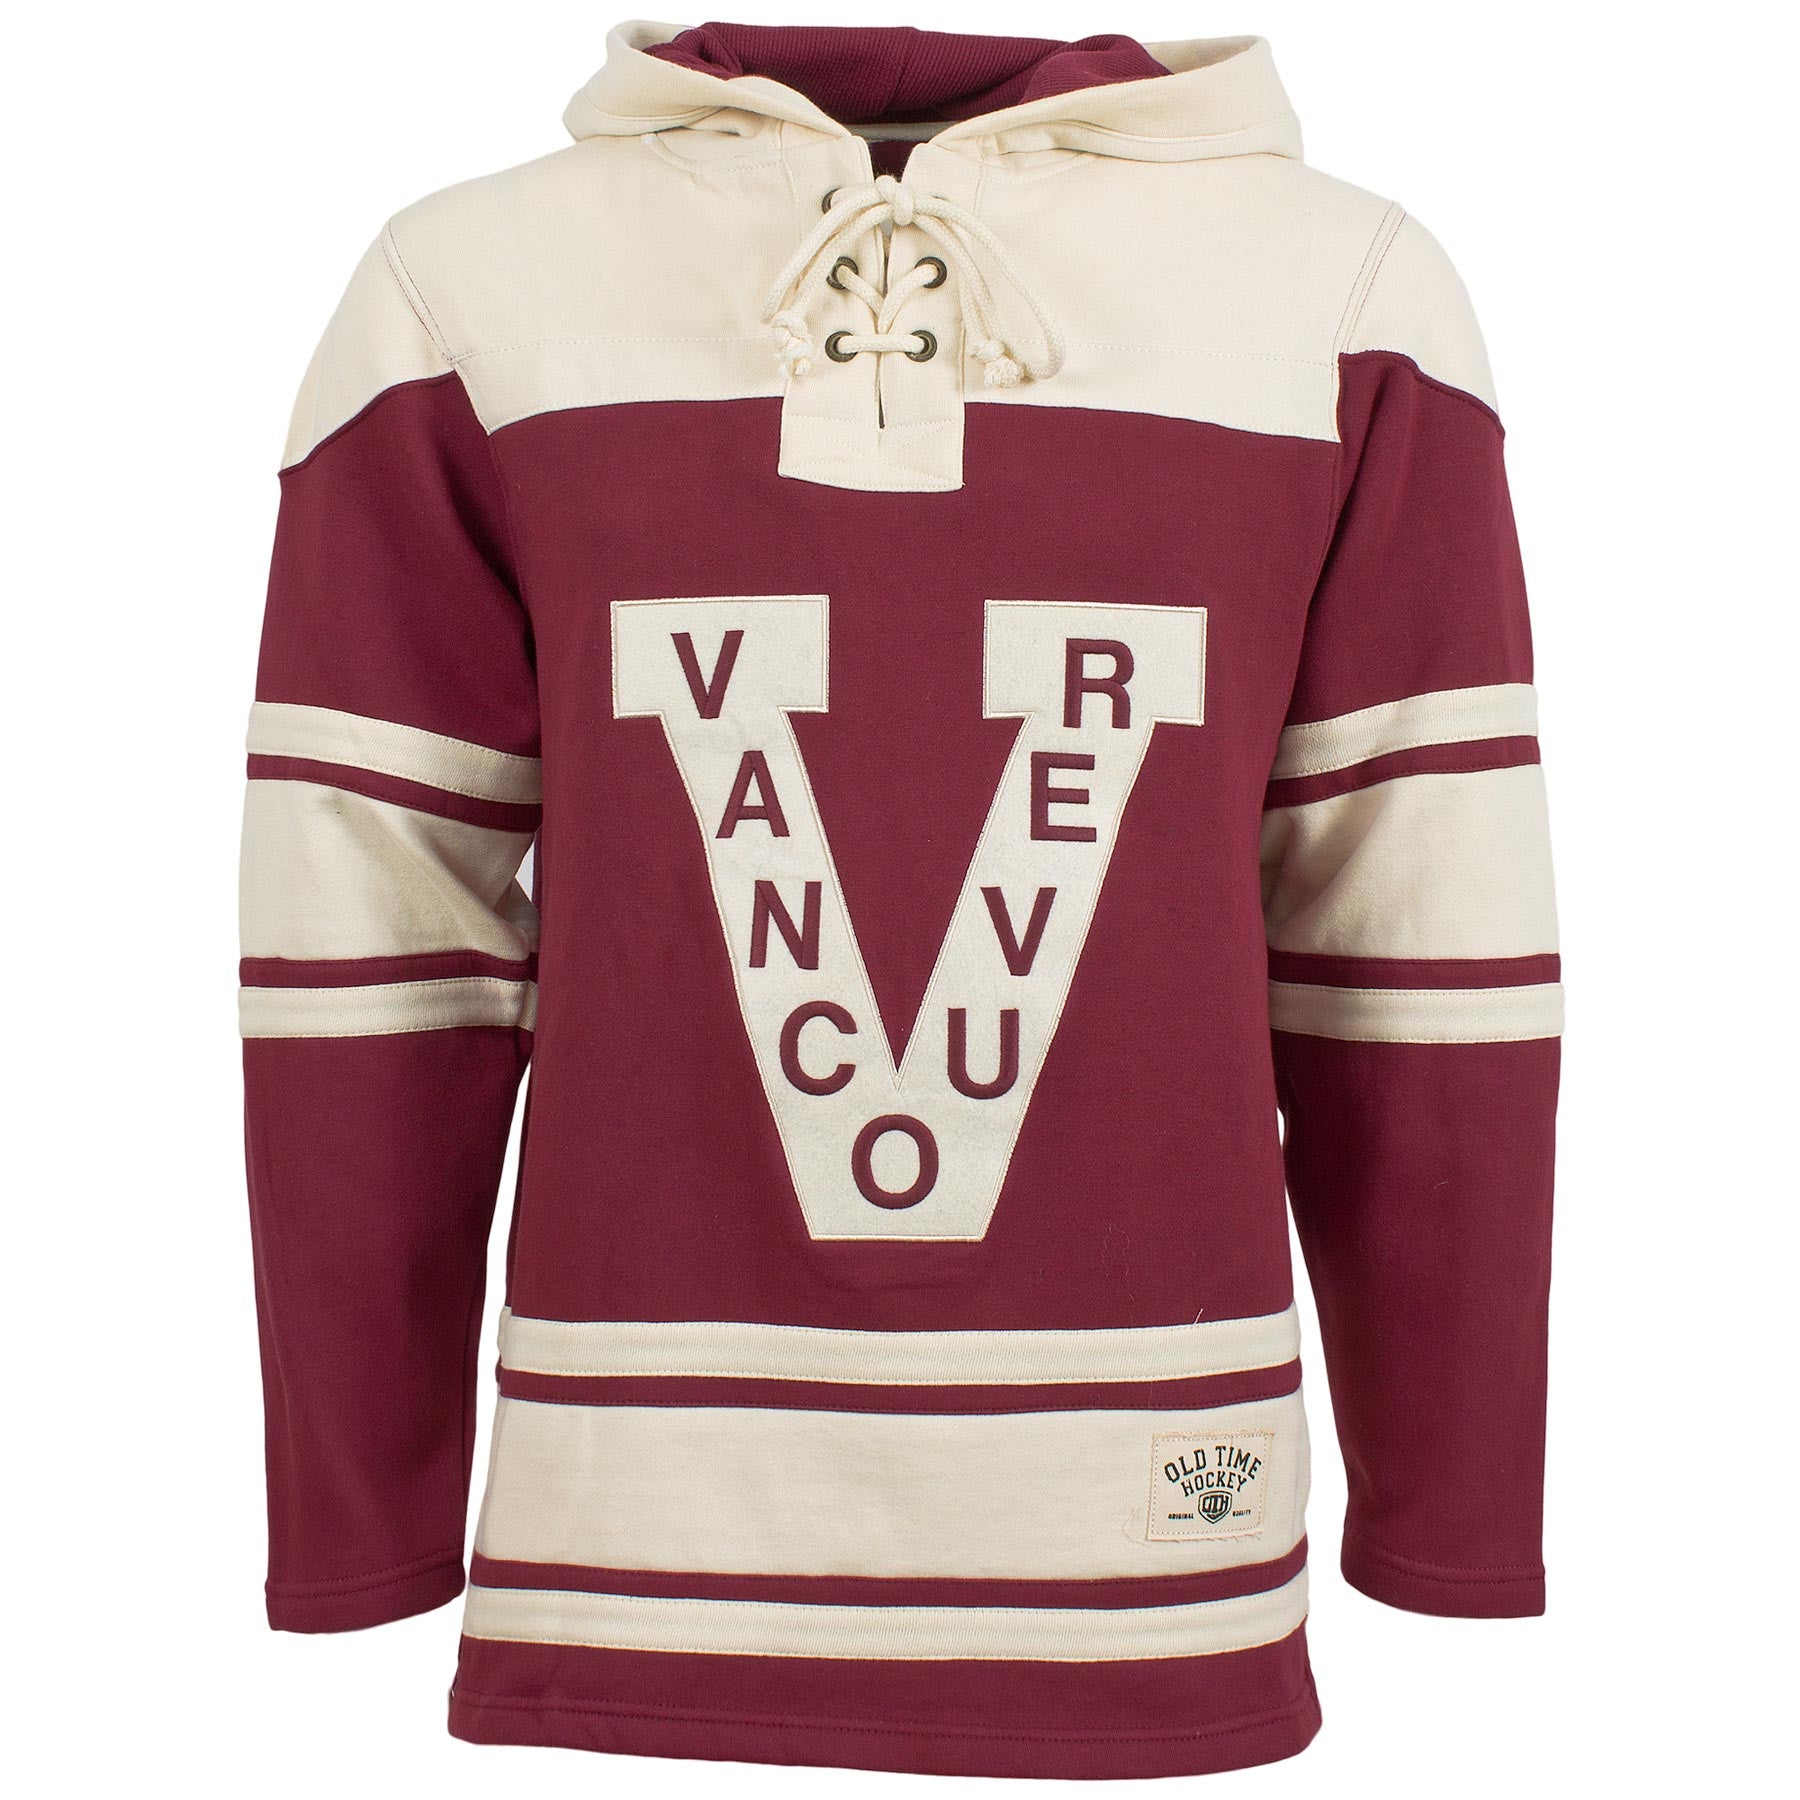 Old Time Hockey Lacer Jersey Hoodie 